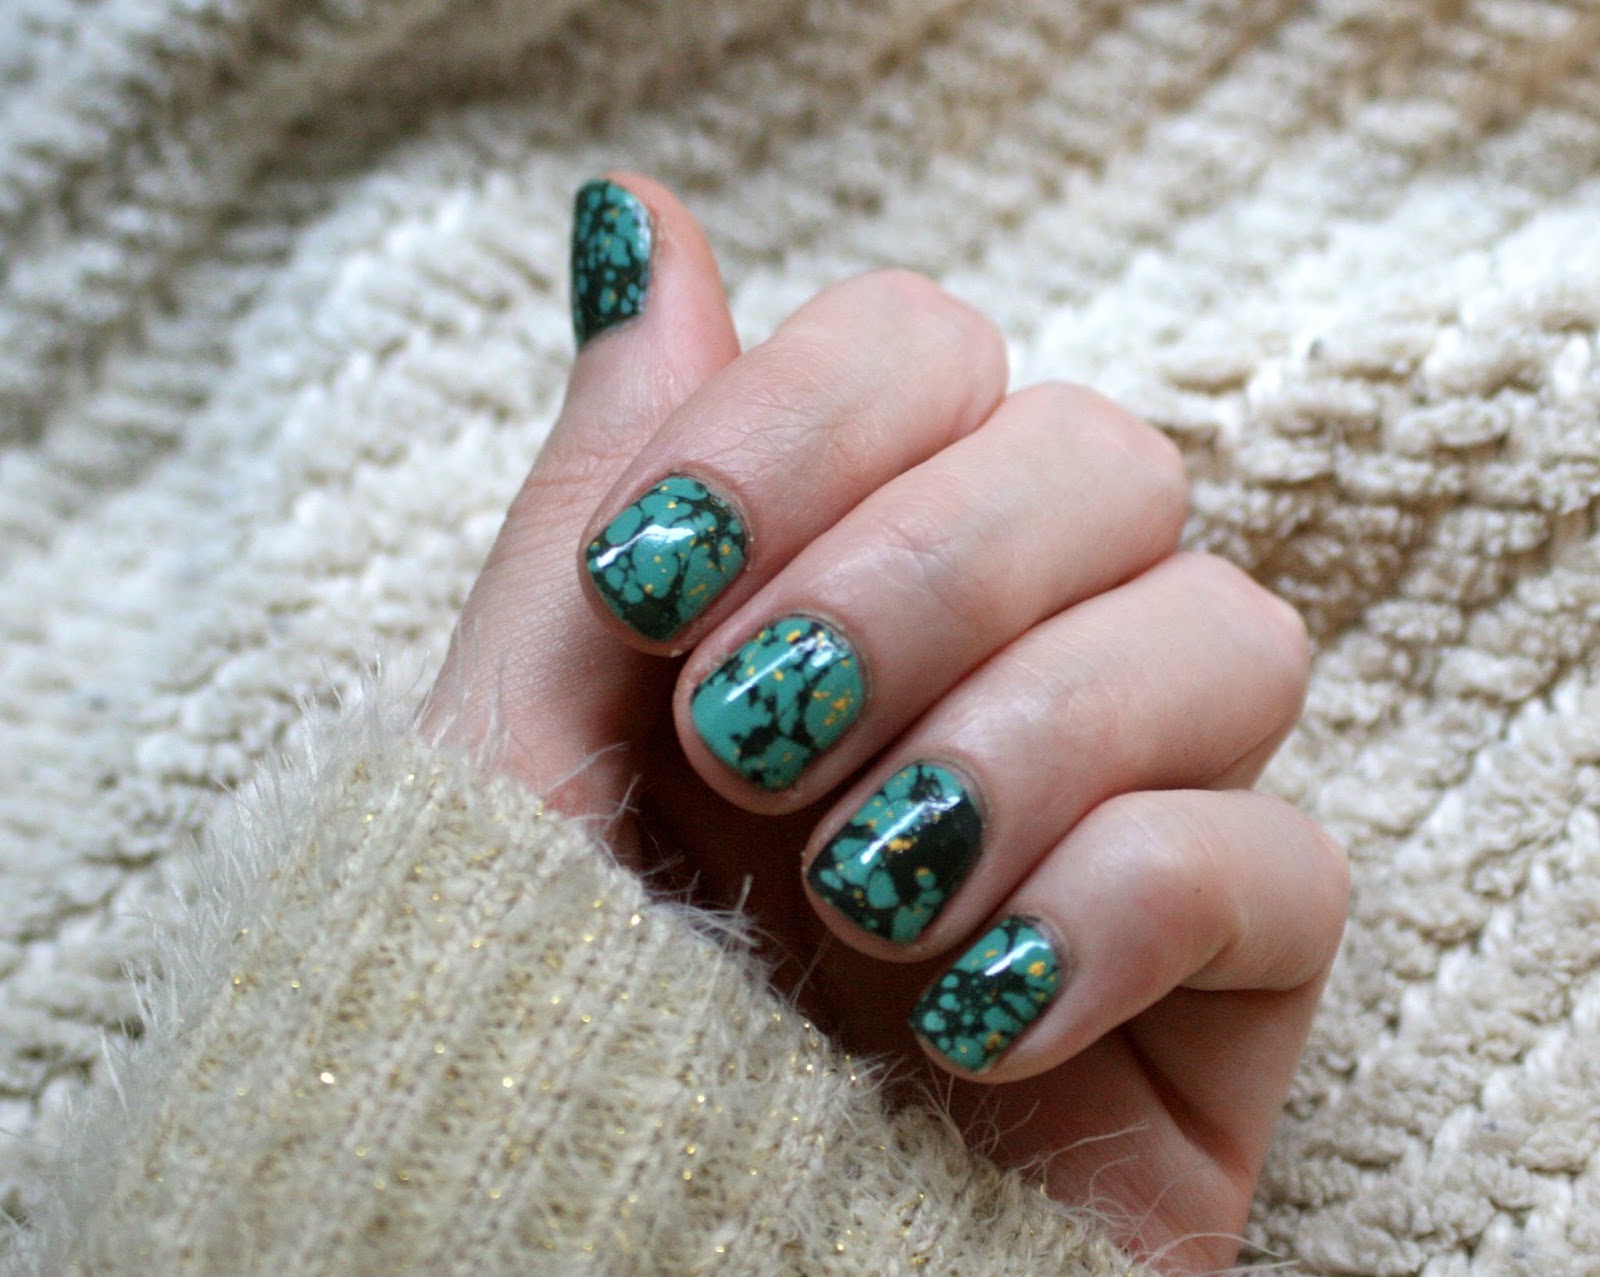 4. Turquoise and Black Nail Art - wide 2